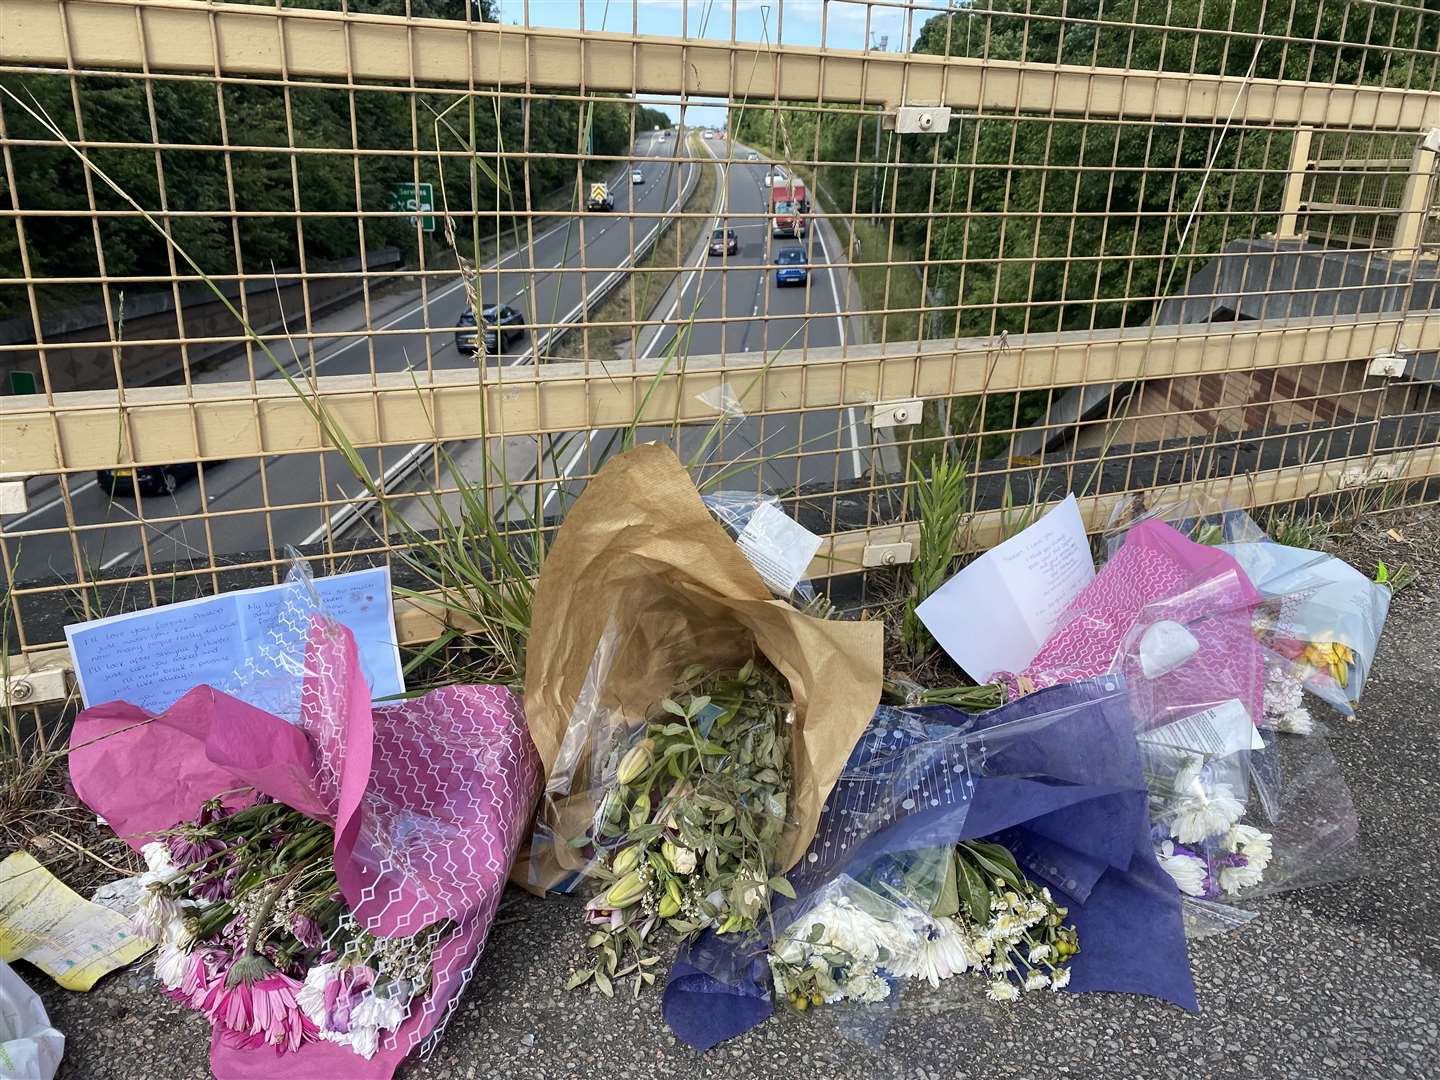 Floral tributes left for Preston Turner after he jumped from a bridge over the A249 into incoming traffic